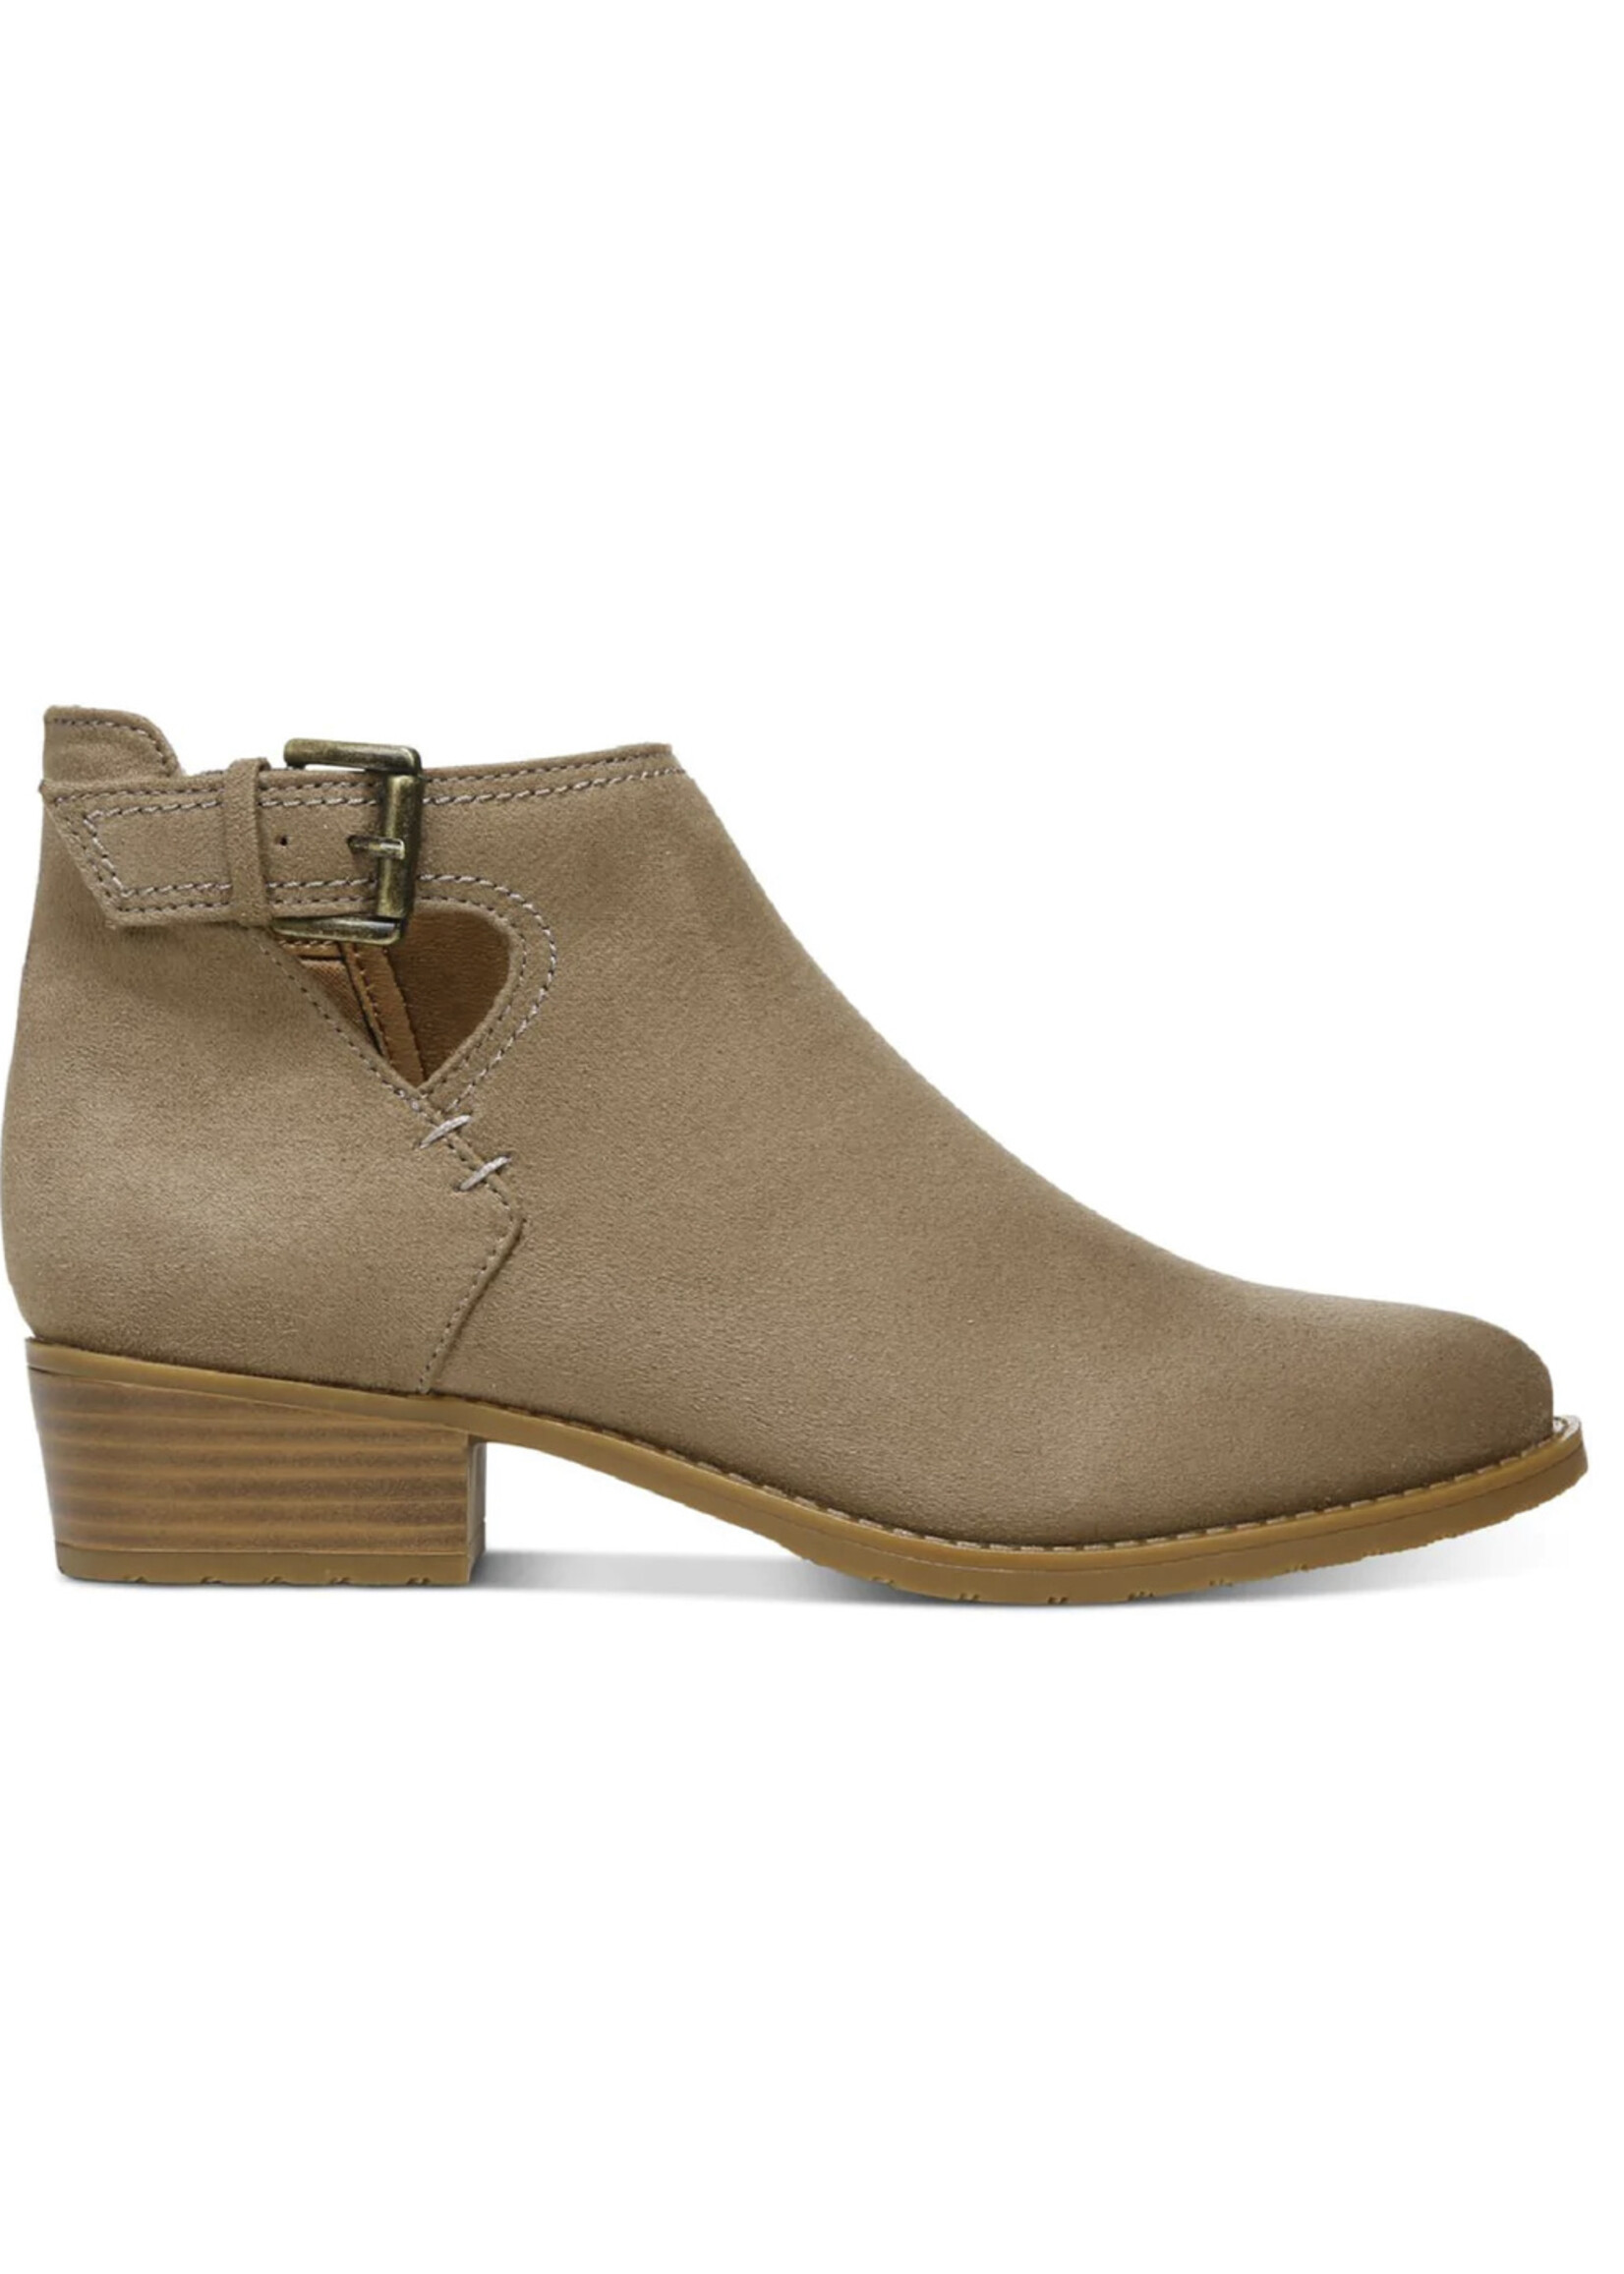 style&co Style & Co Women's Taupe Cutout Booties